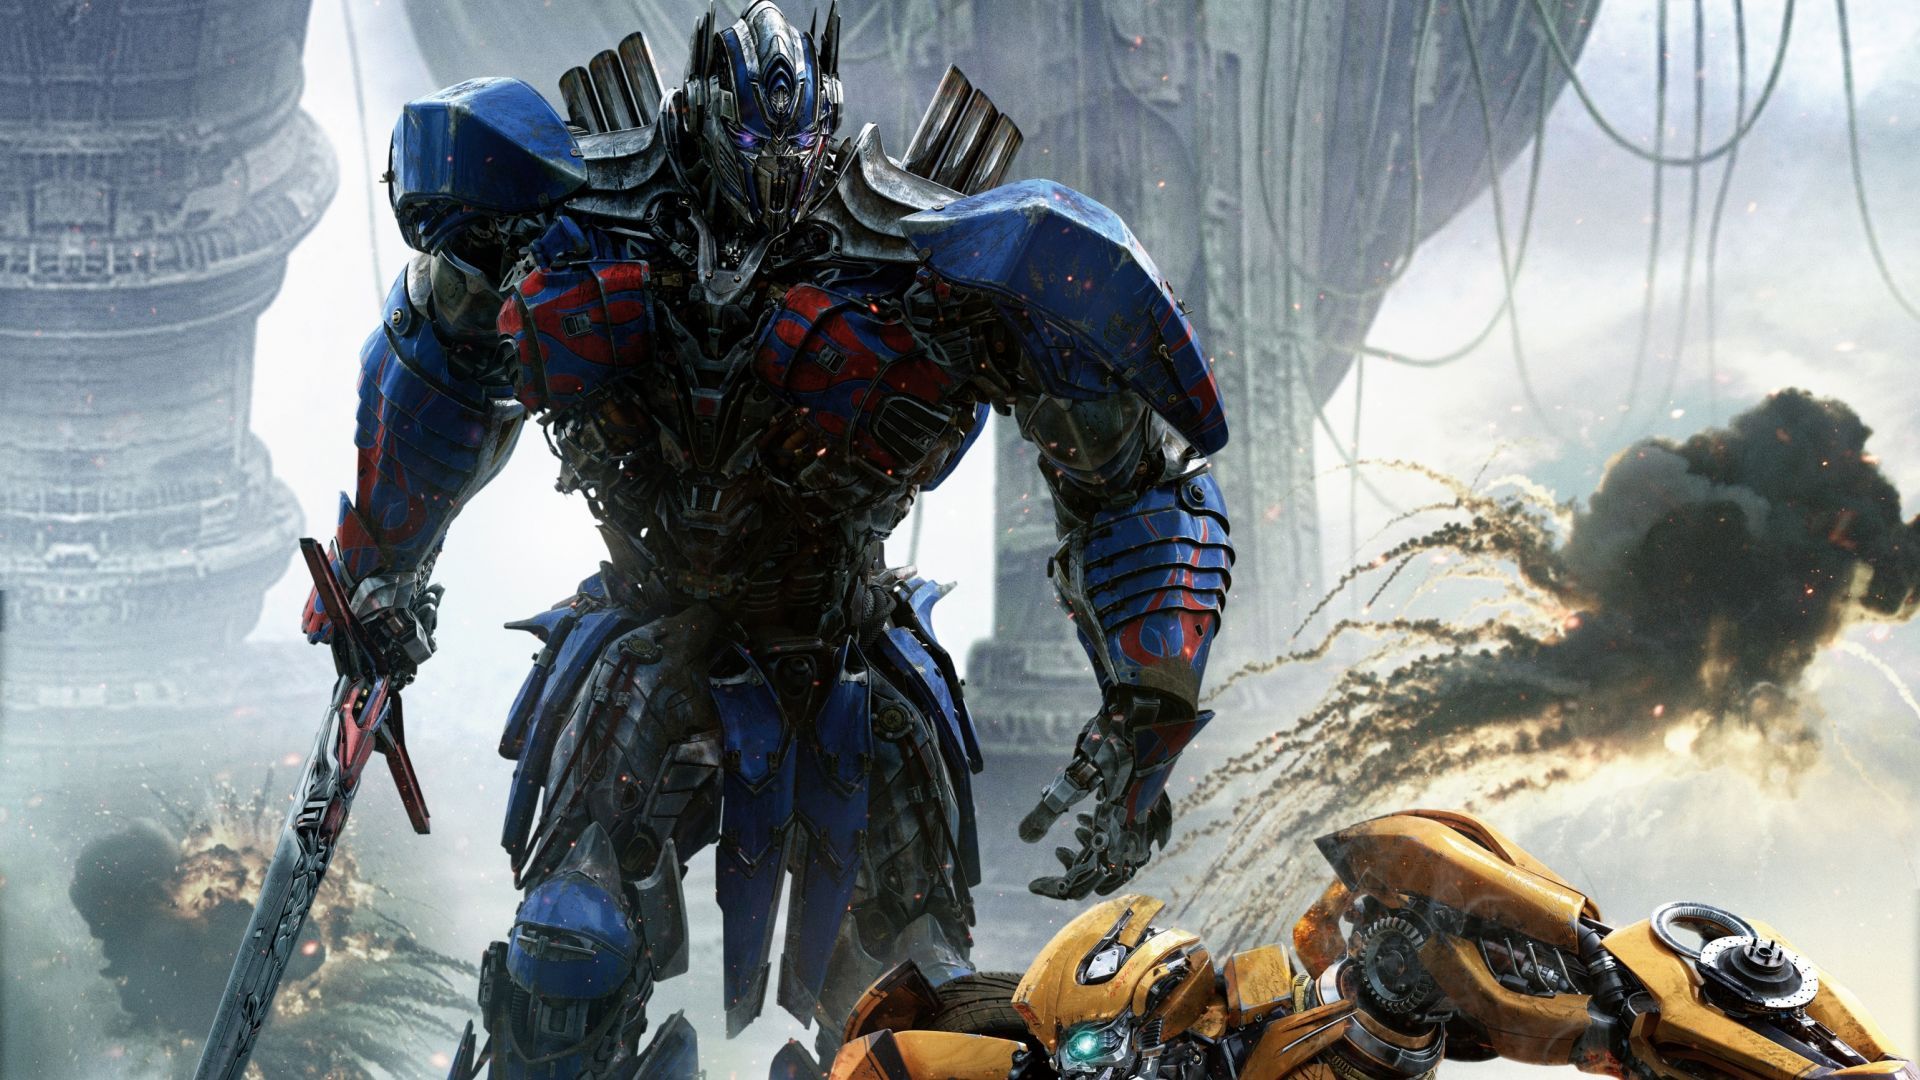 Desktop Wallpaper Transformers: The Last Knight, Optimus Prime, Bumblebee, HD Image, Picture, Background, Mdskmh